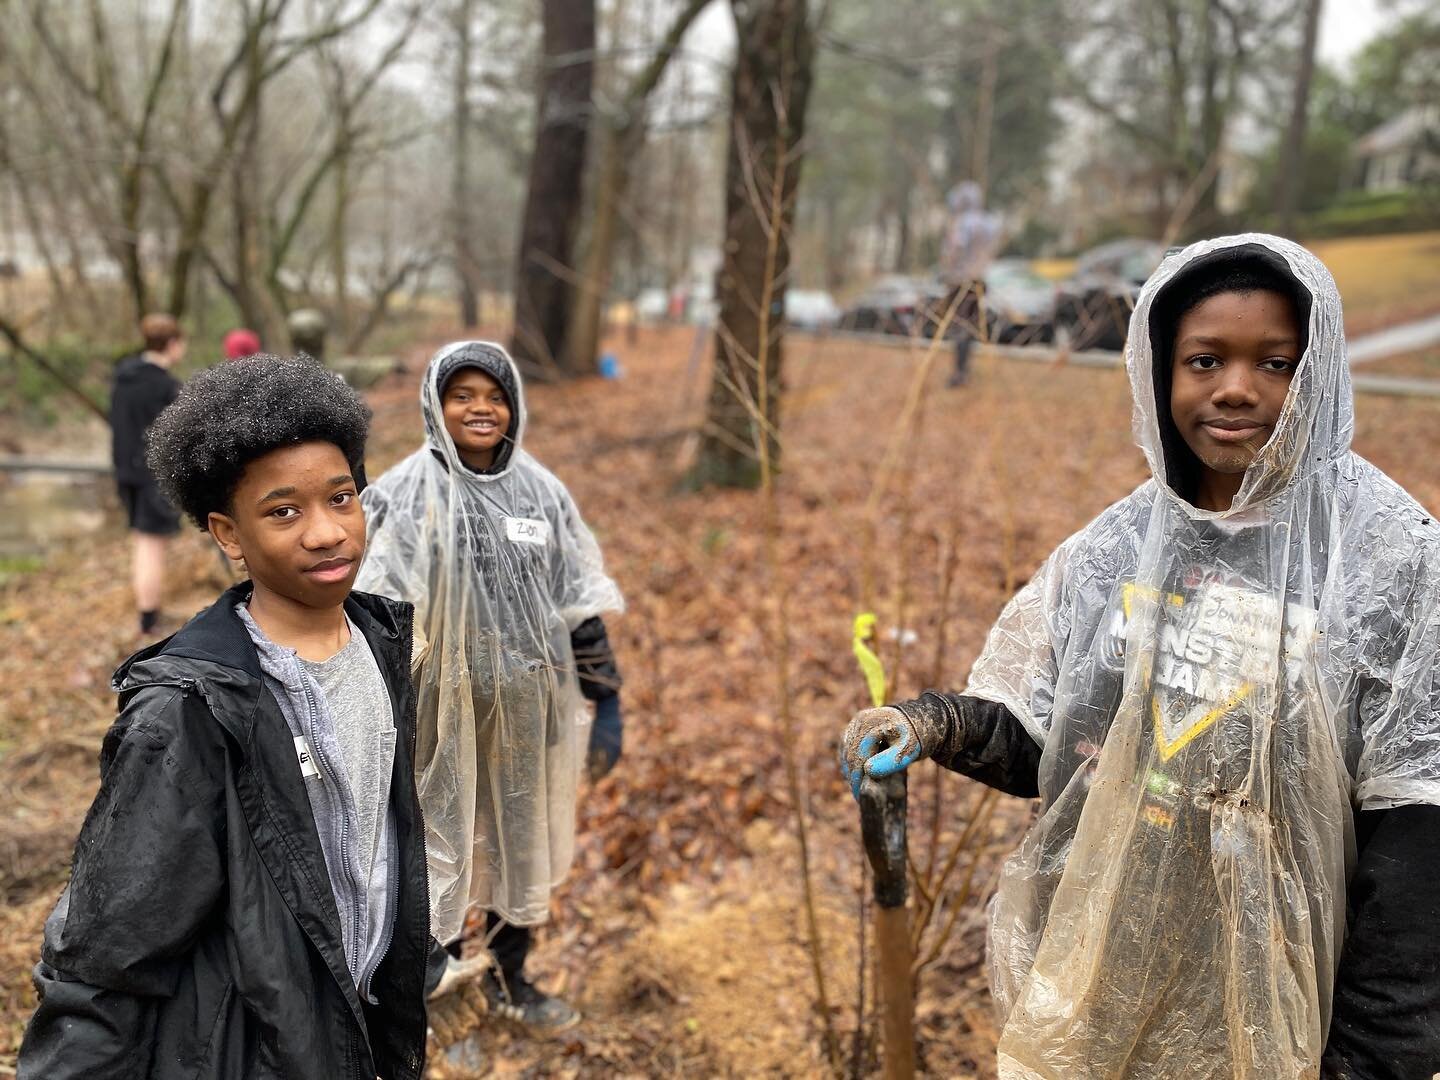 This Saturday, A+ Squash joined forces with Trees Atlanta for a fantastic morning of community service! Our dedicated students, staff and friends braved the elements to plant trees at Memorial Park. Huge shoutout to the amazing Trees Atlanta team for